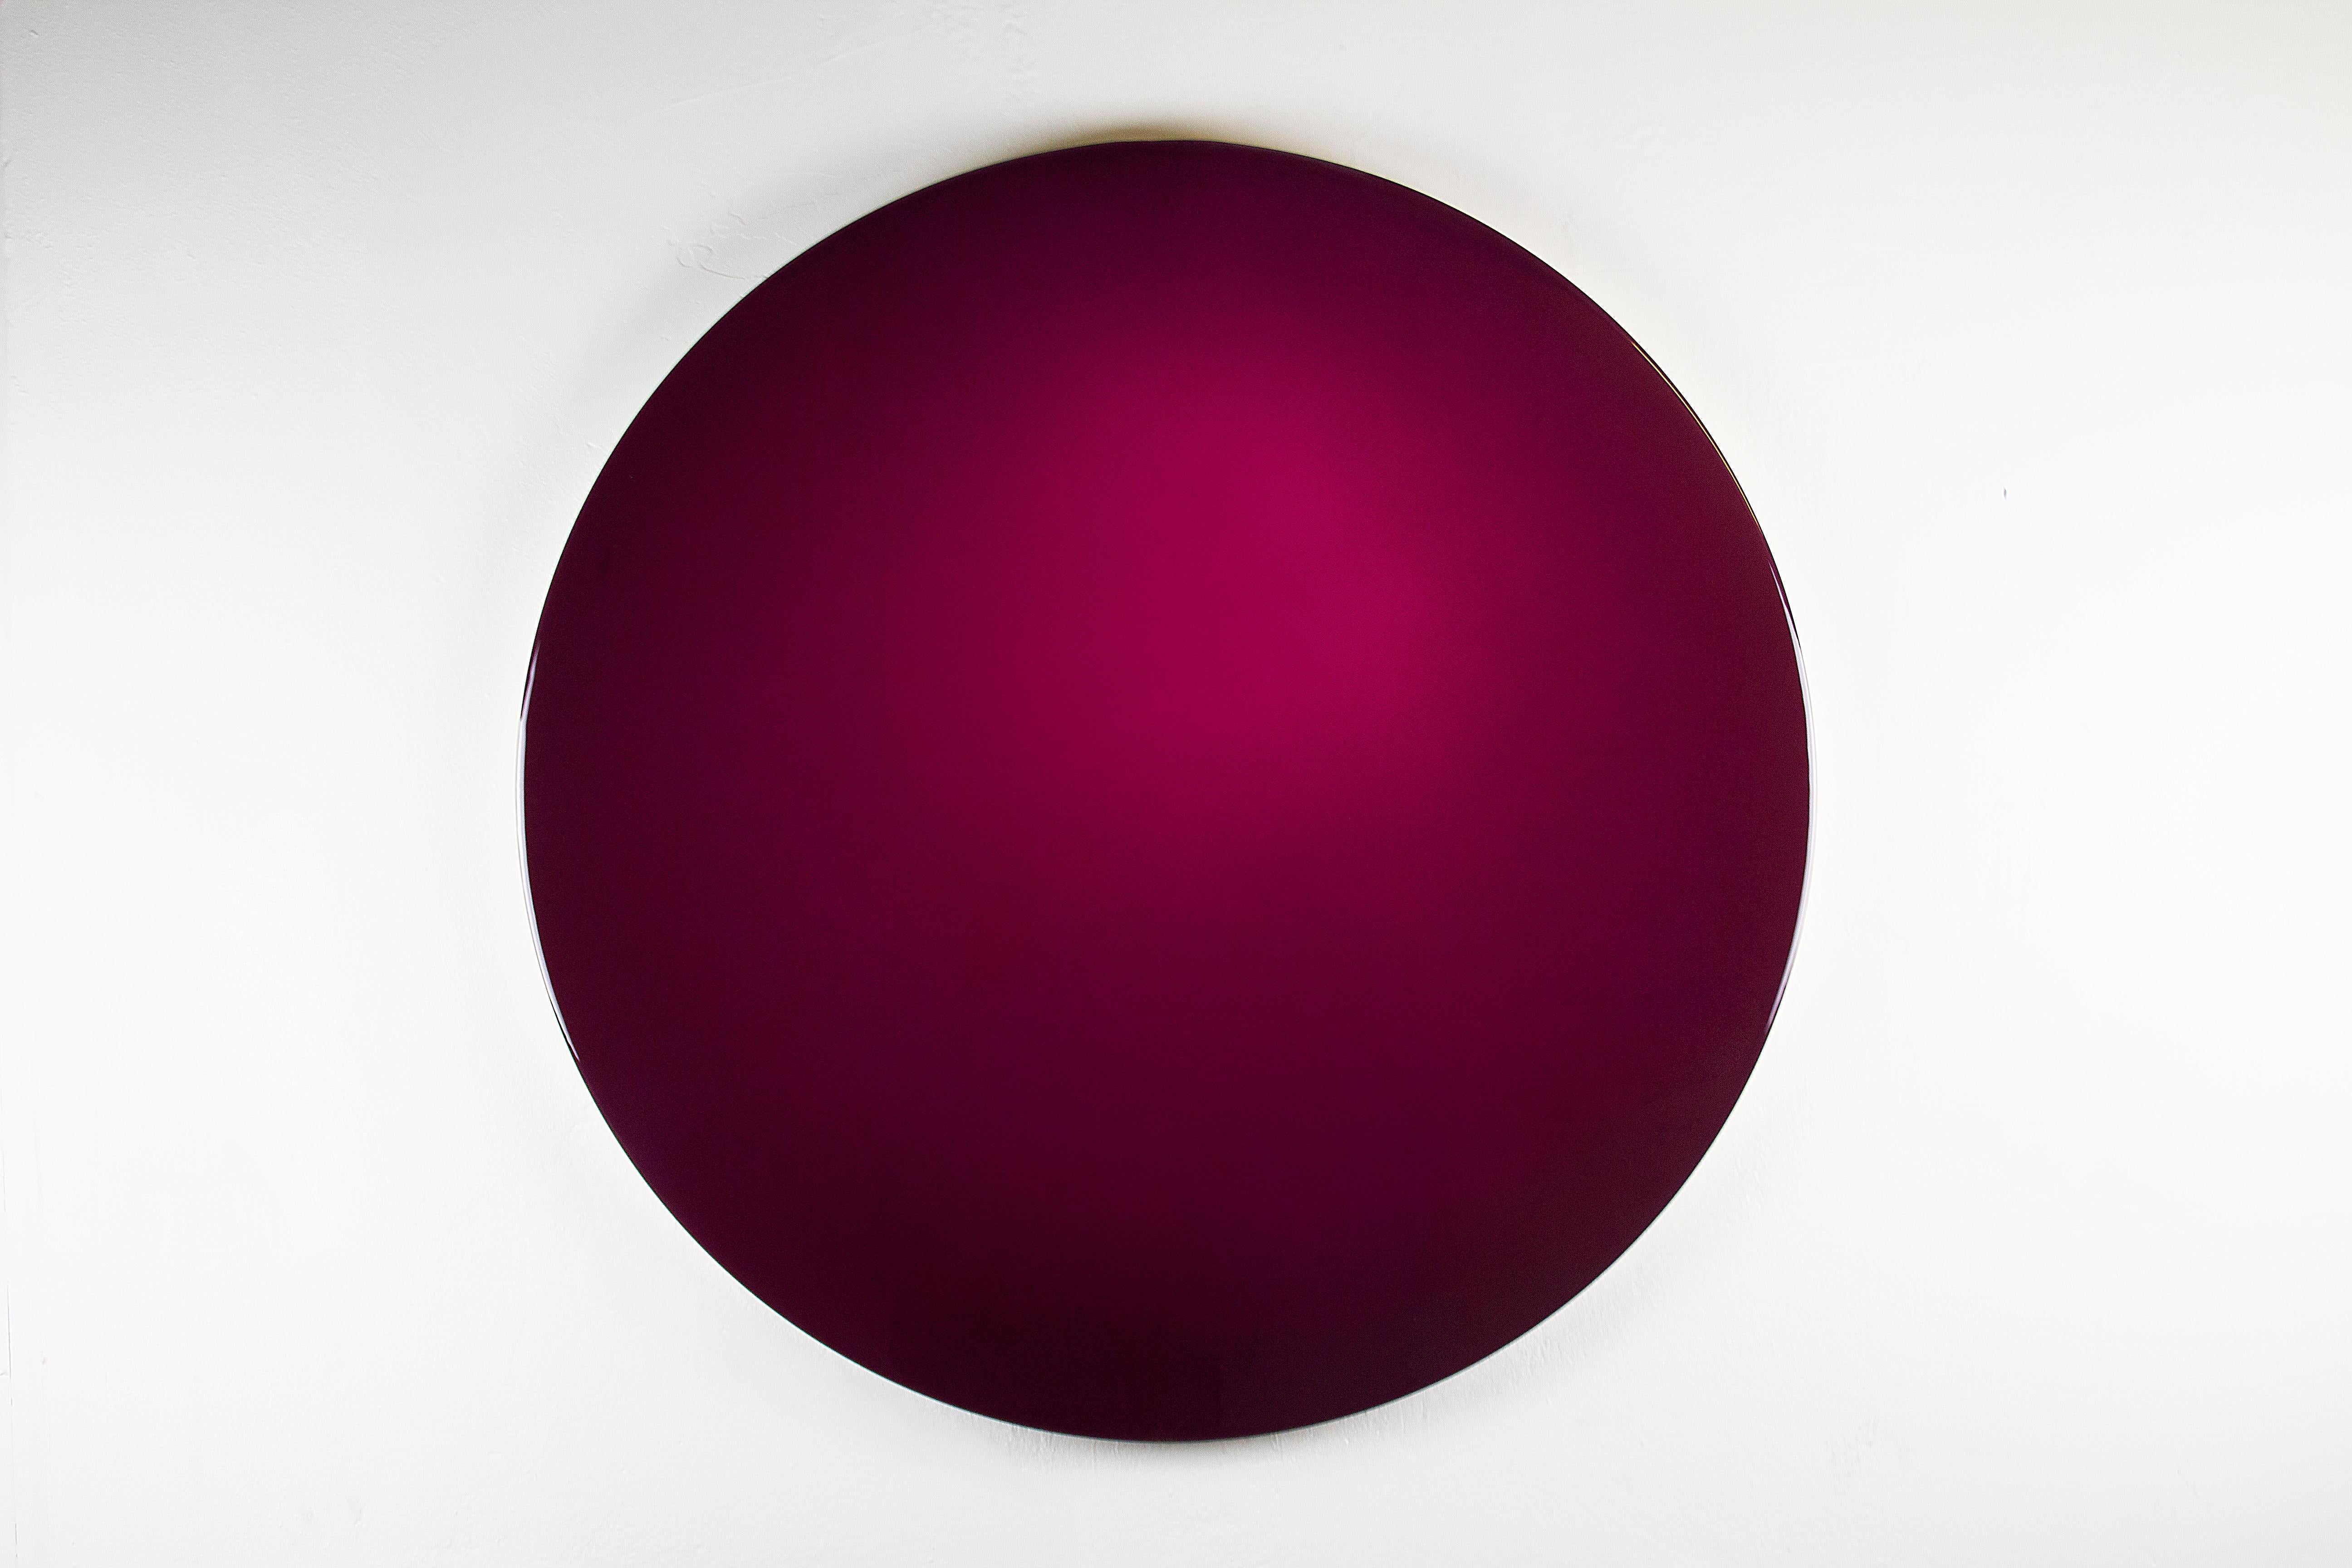 Blush minimalist round by Corine Vanvoorbergen
Dimensions: diameter 140 cm
Materials: Brass, wood, natural pigments, epoxy and acrylics

Love, Anger, Shame, Frustration, Passion.
It comes and it goes.
Think about it.

Corine van Voorbergen